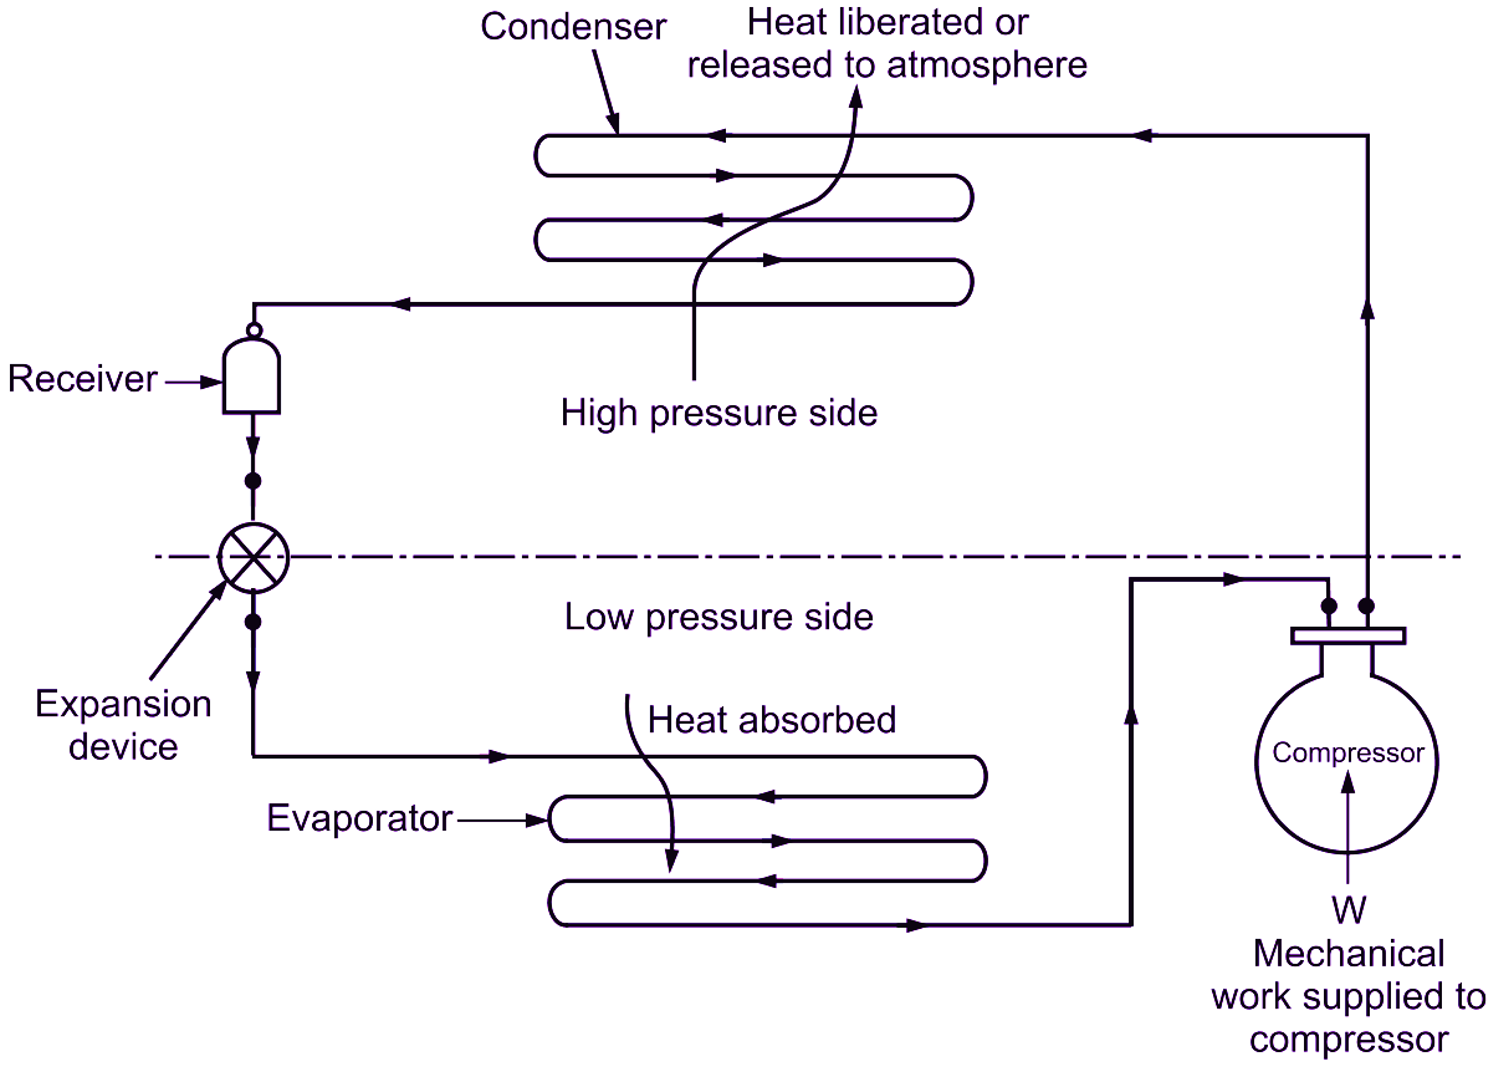 Pressure Sides of Vapour Compression Cycle